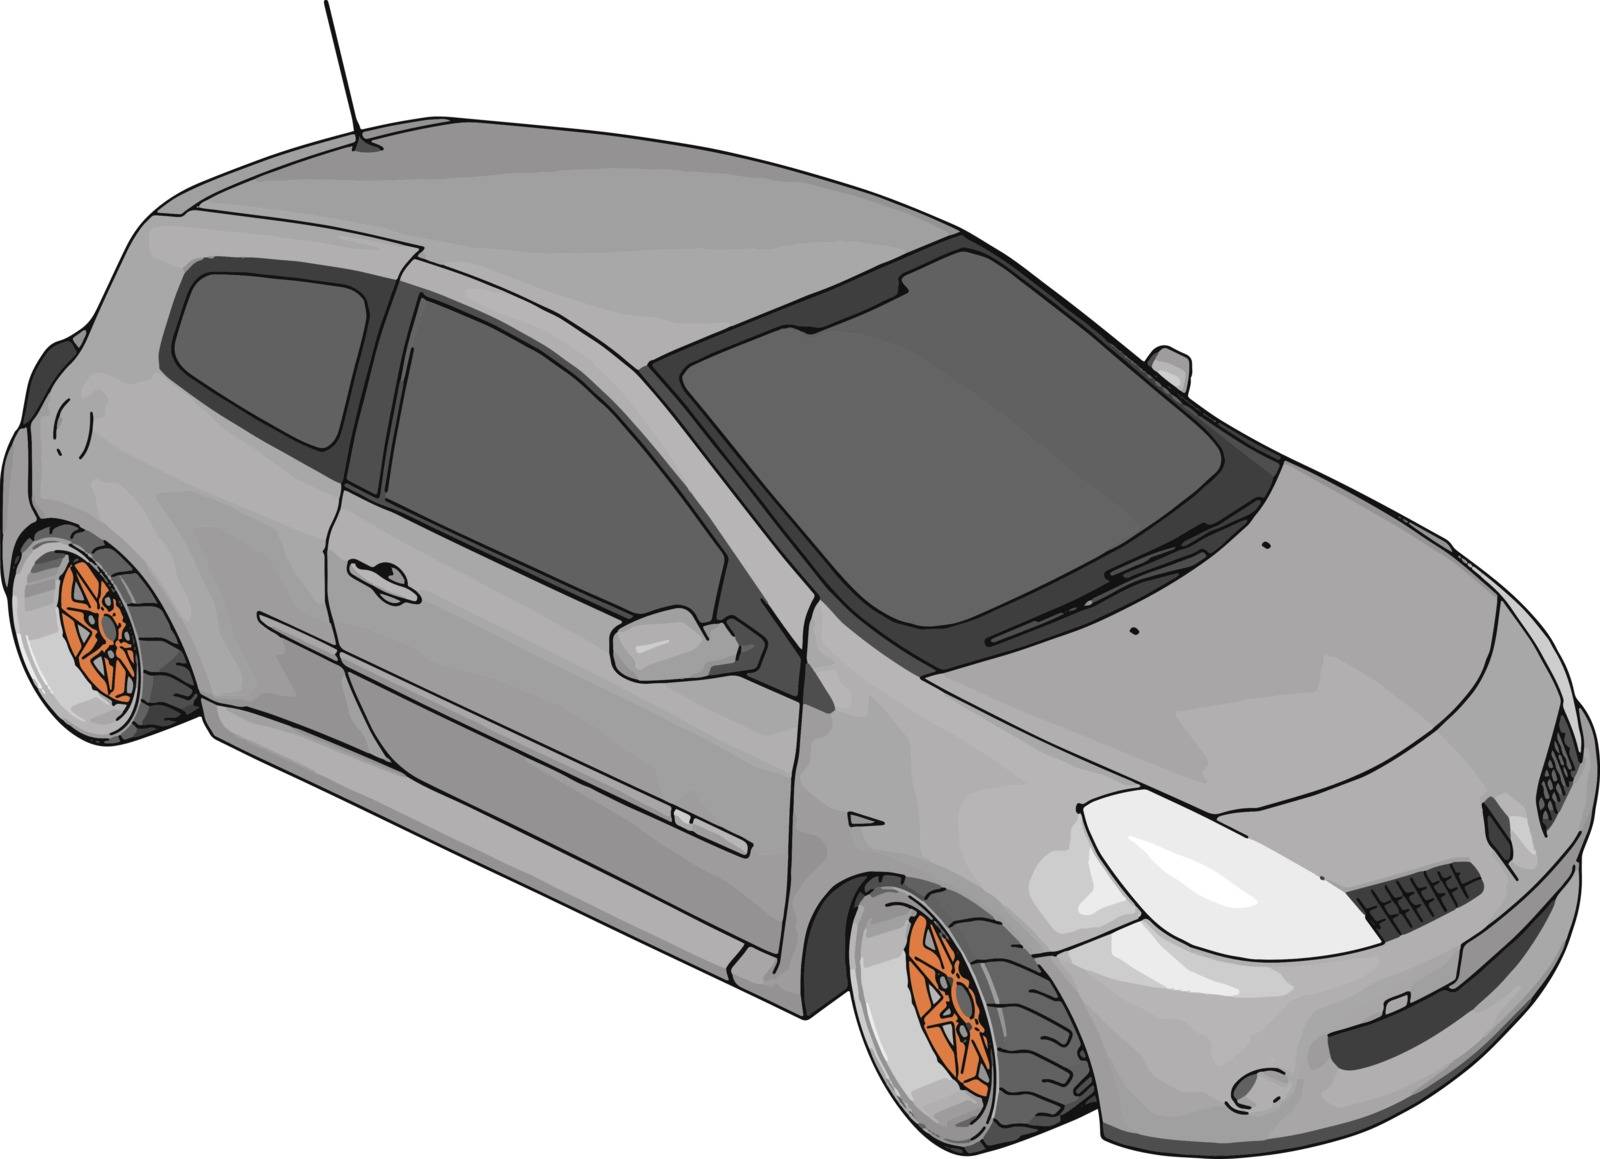 White renault clio, illustration, vector on white background. by Morphart